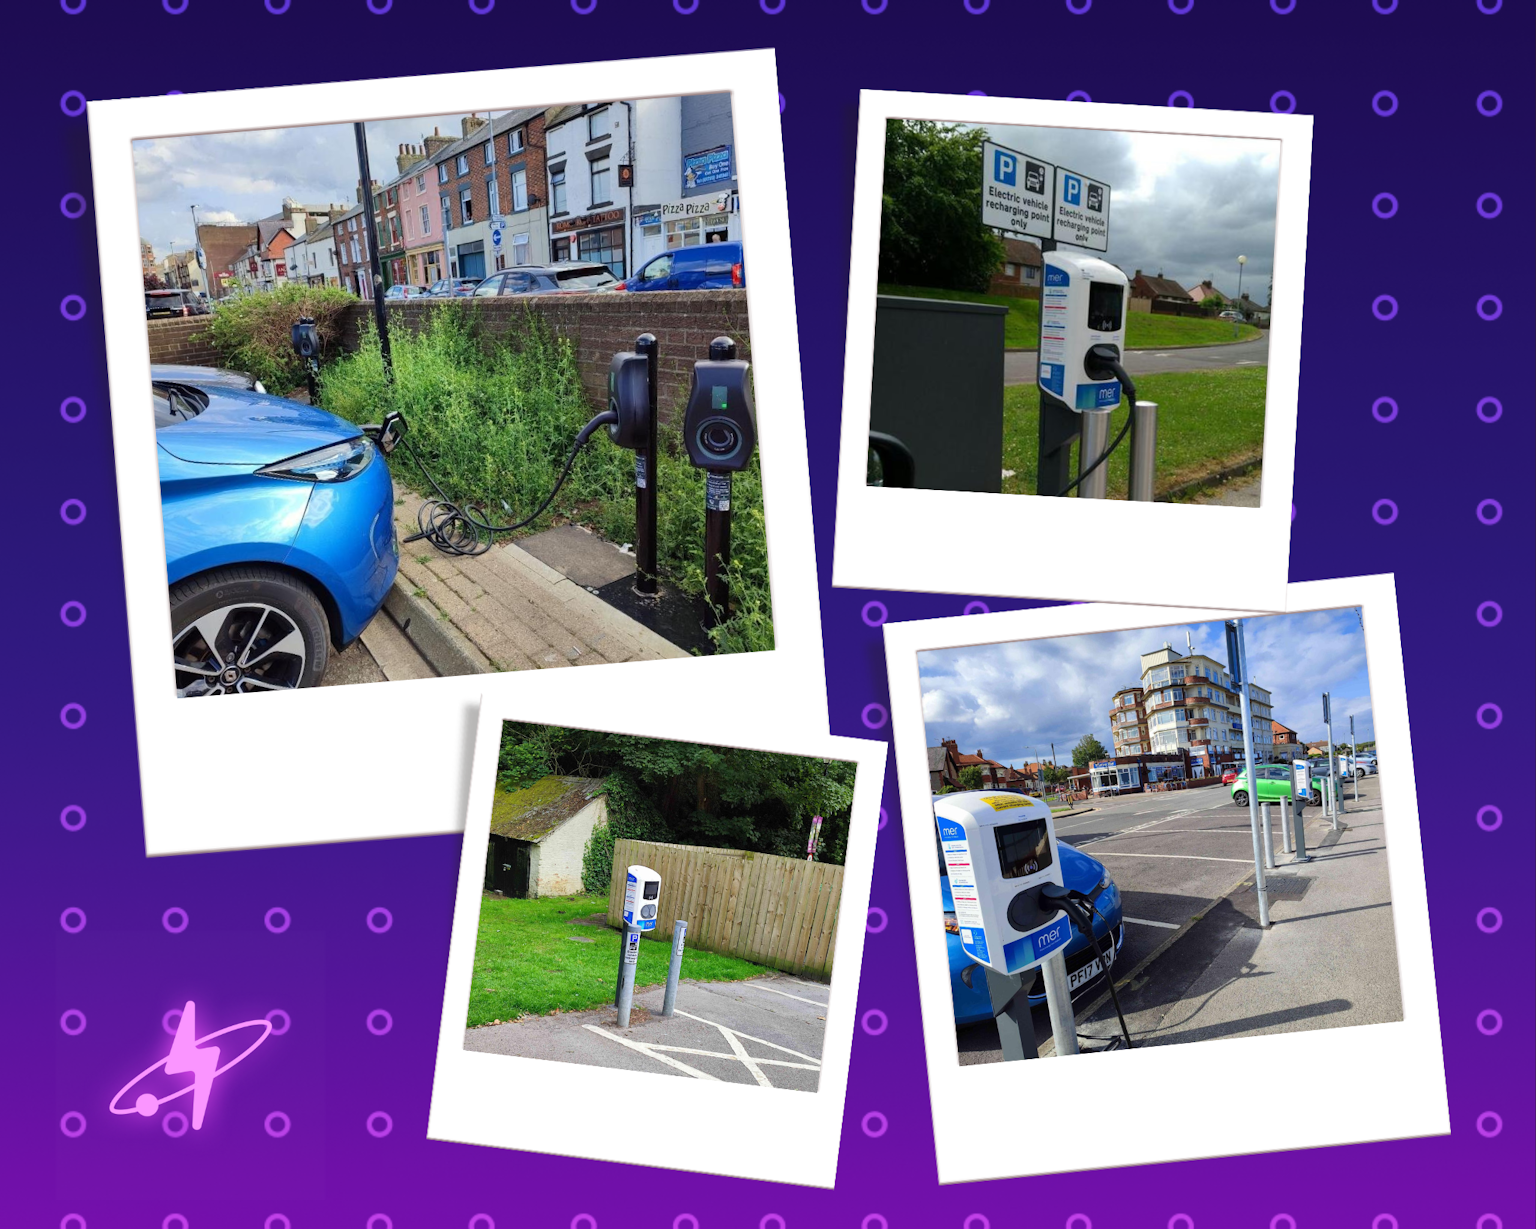 Runner up photo competition (non-London) July charge point photos